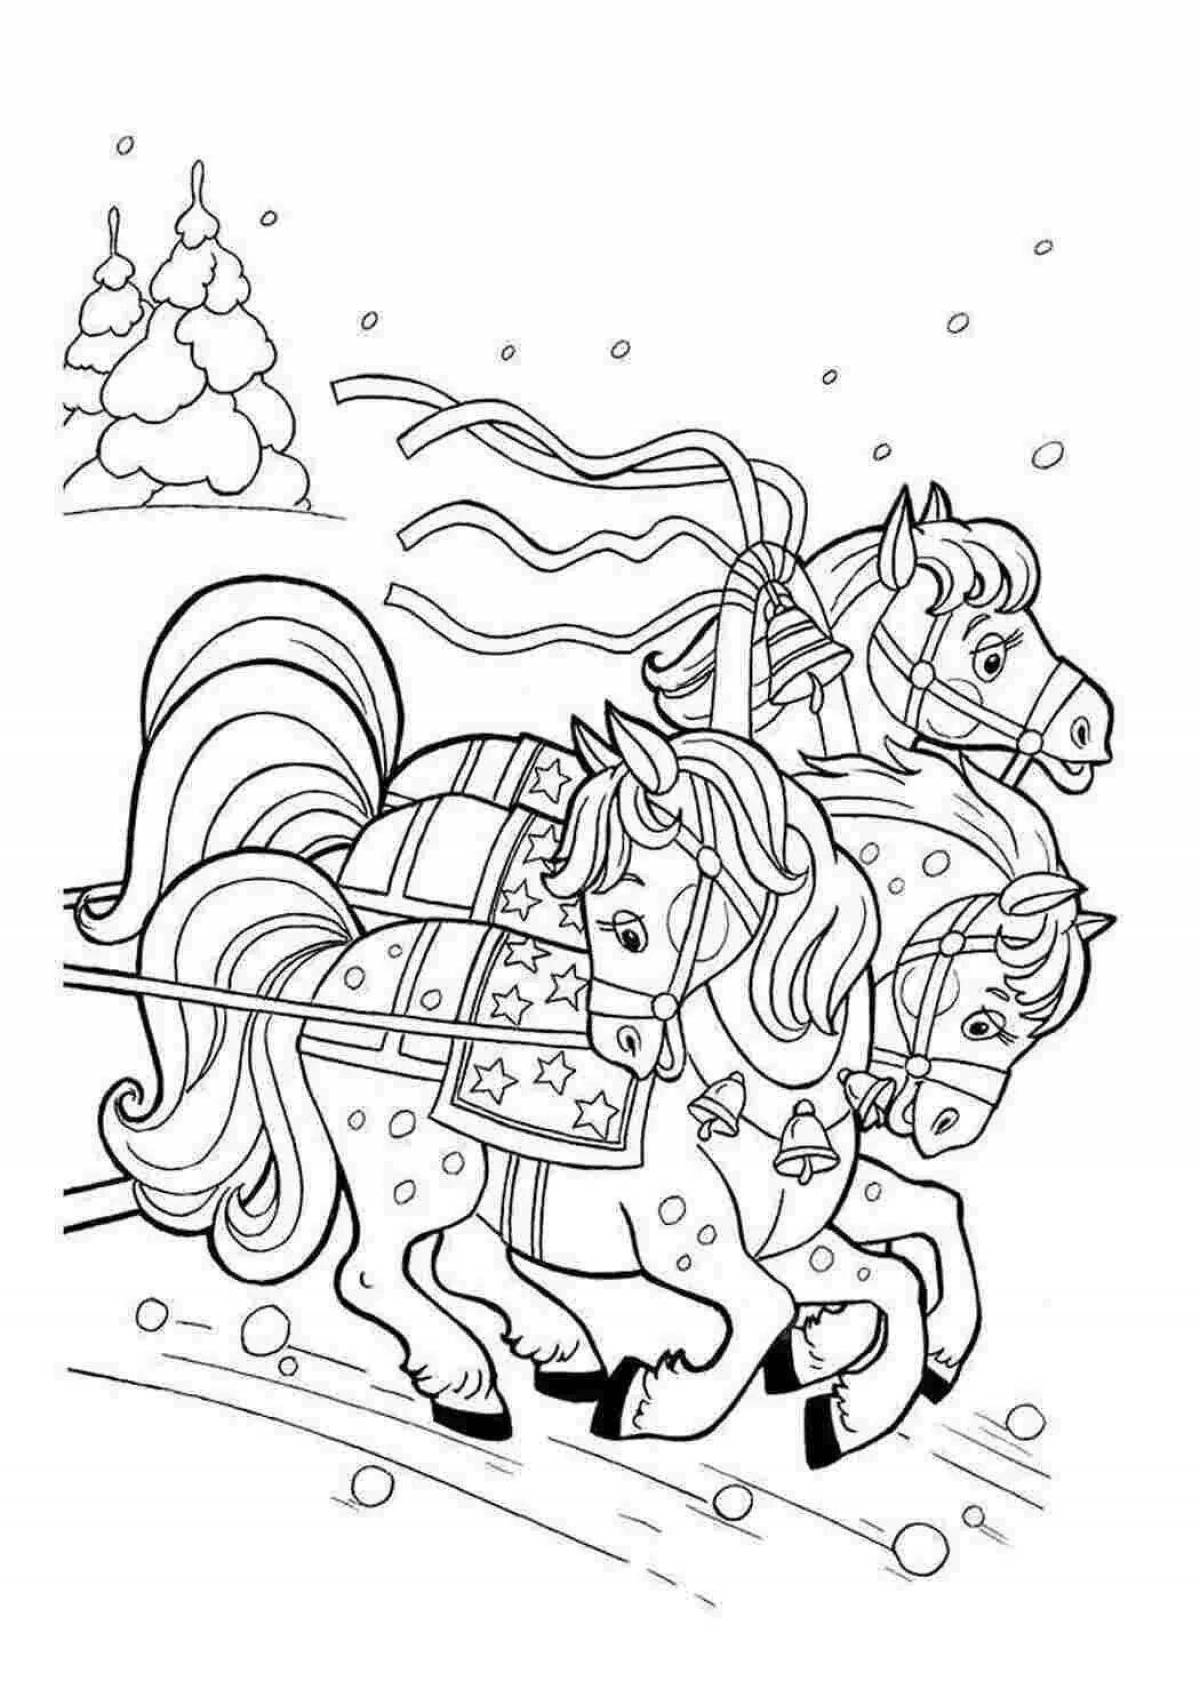 Horse with sleigh #3